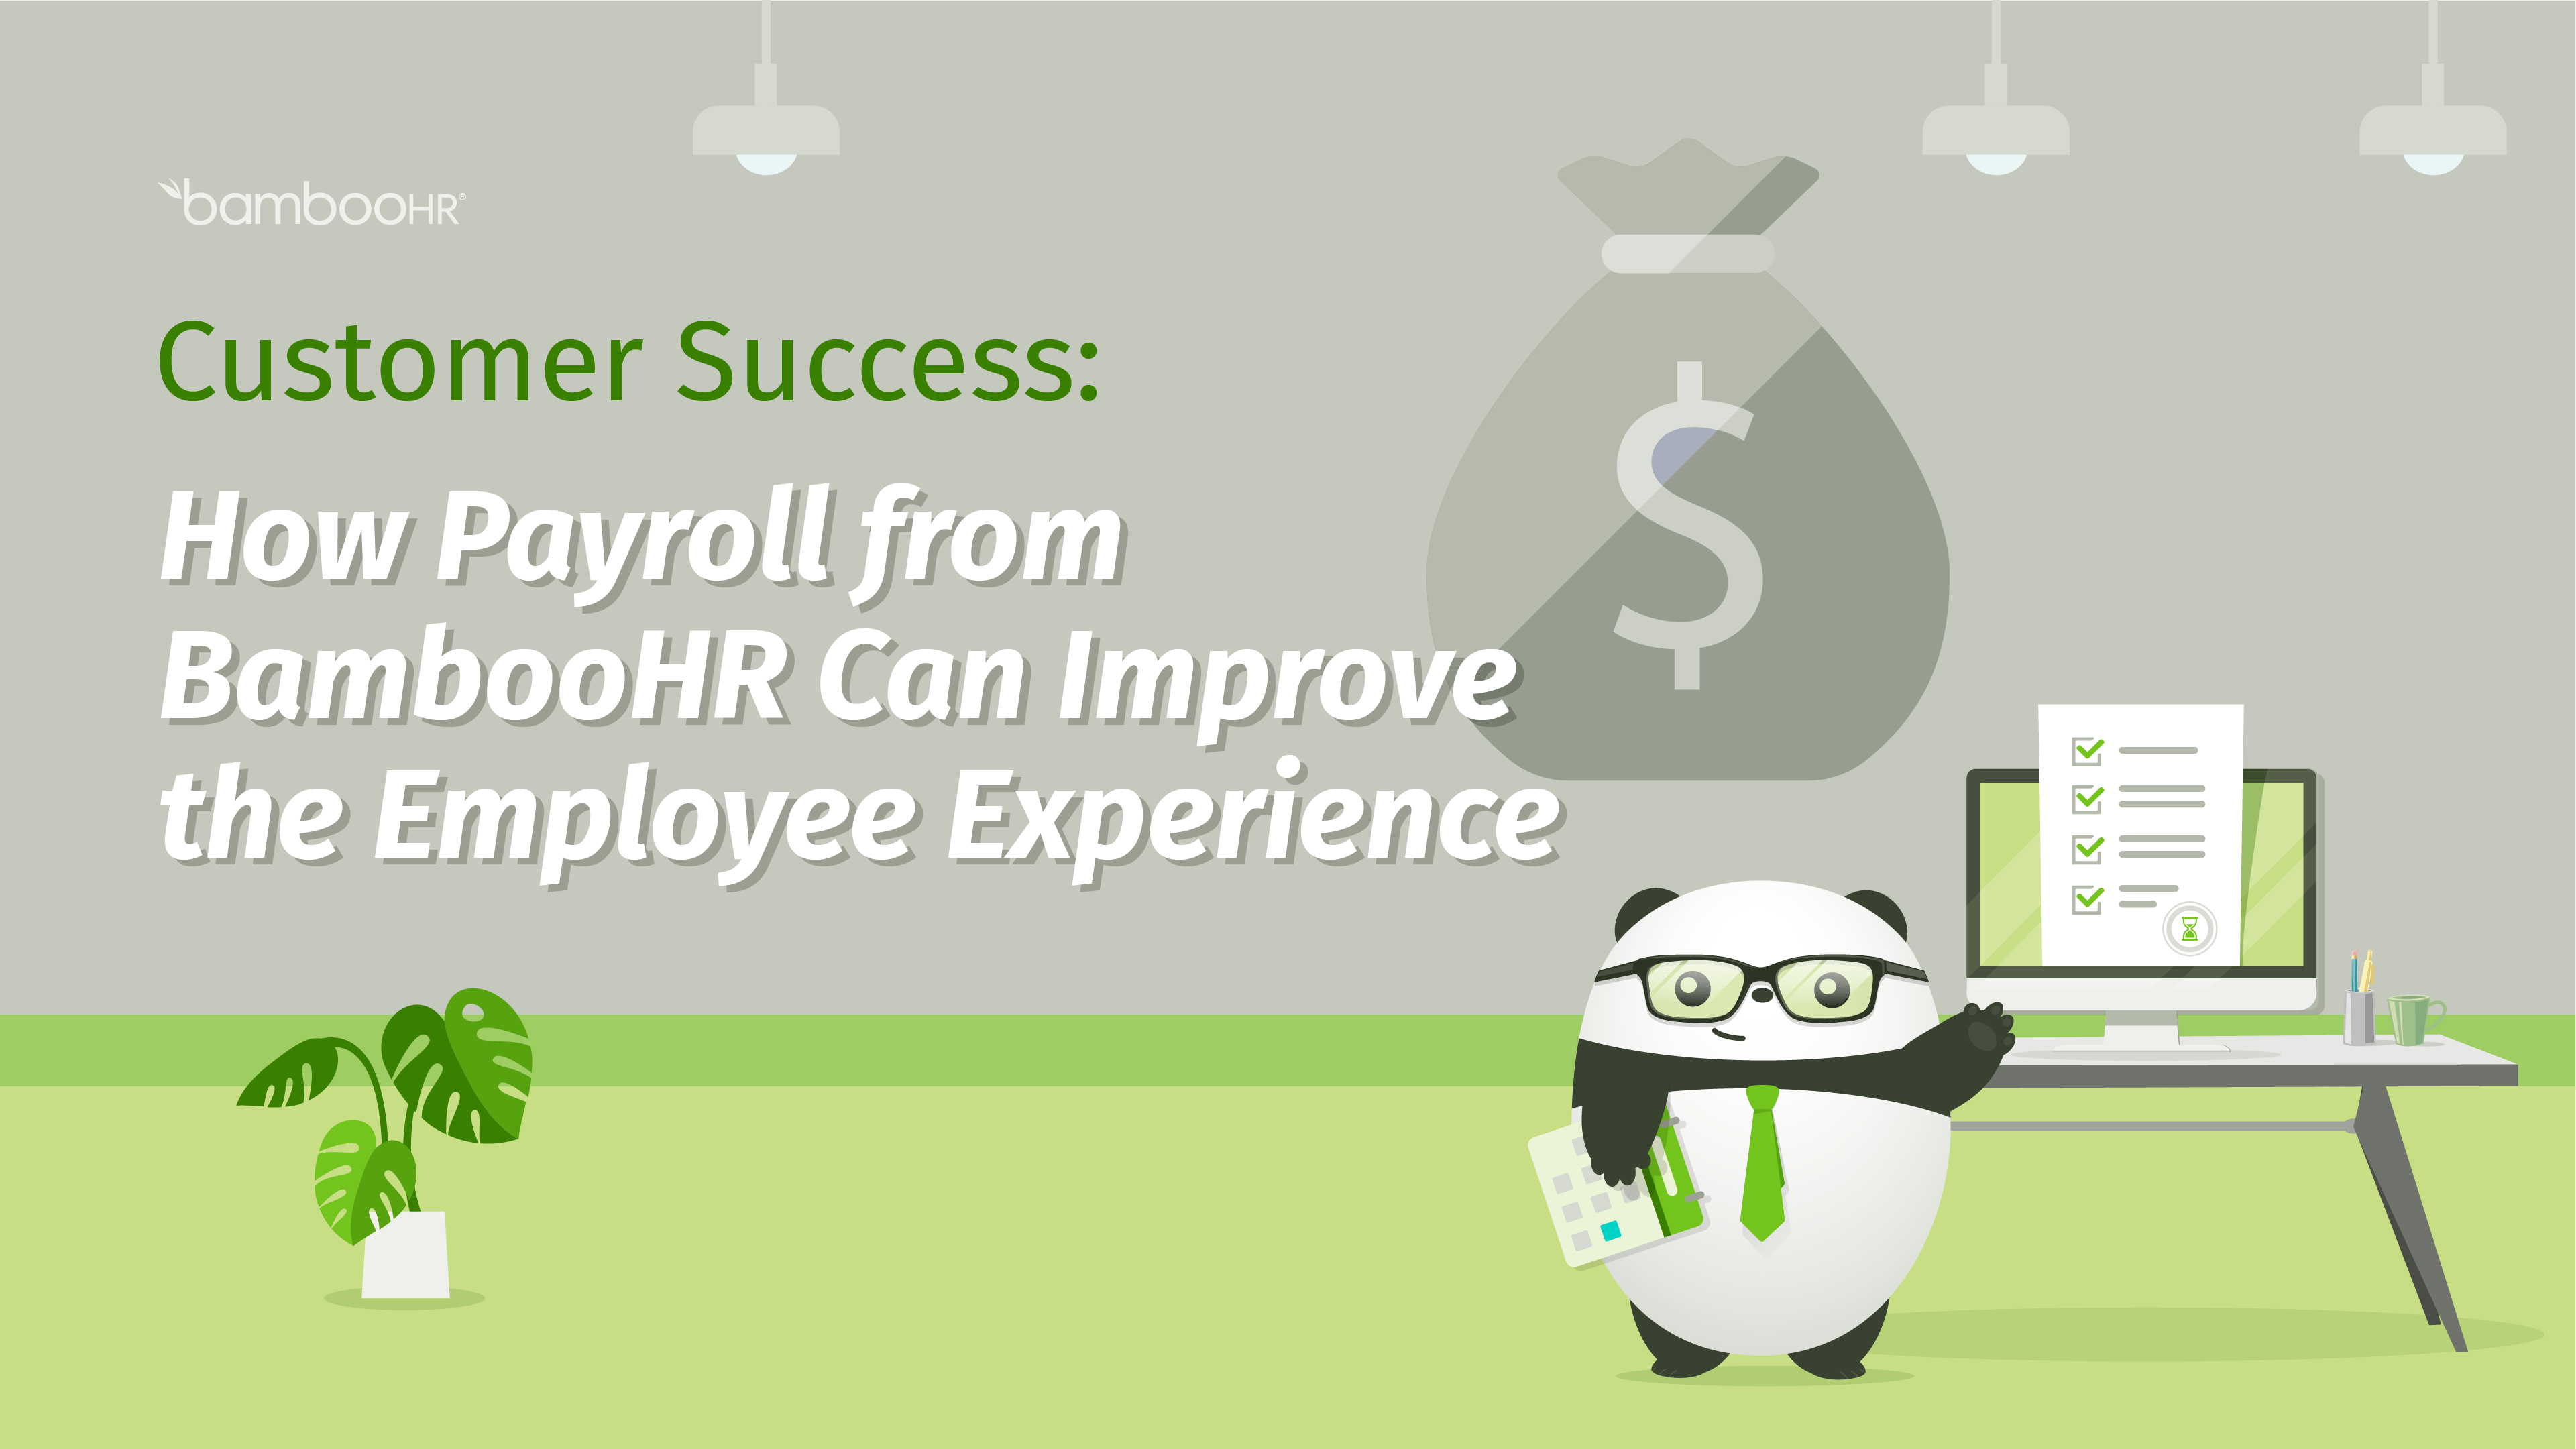 How Payroll from BambooHR Can Improve the Employee Experience